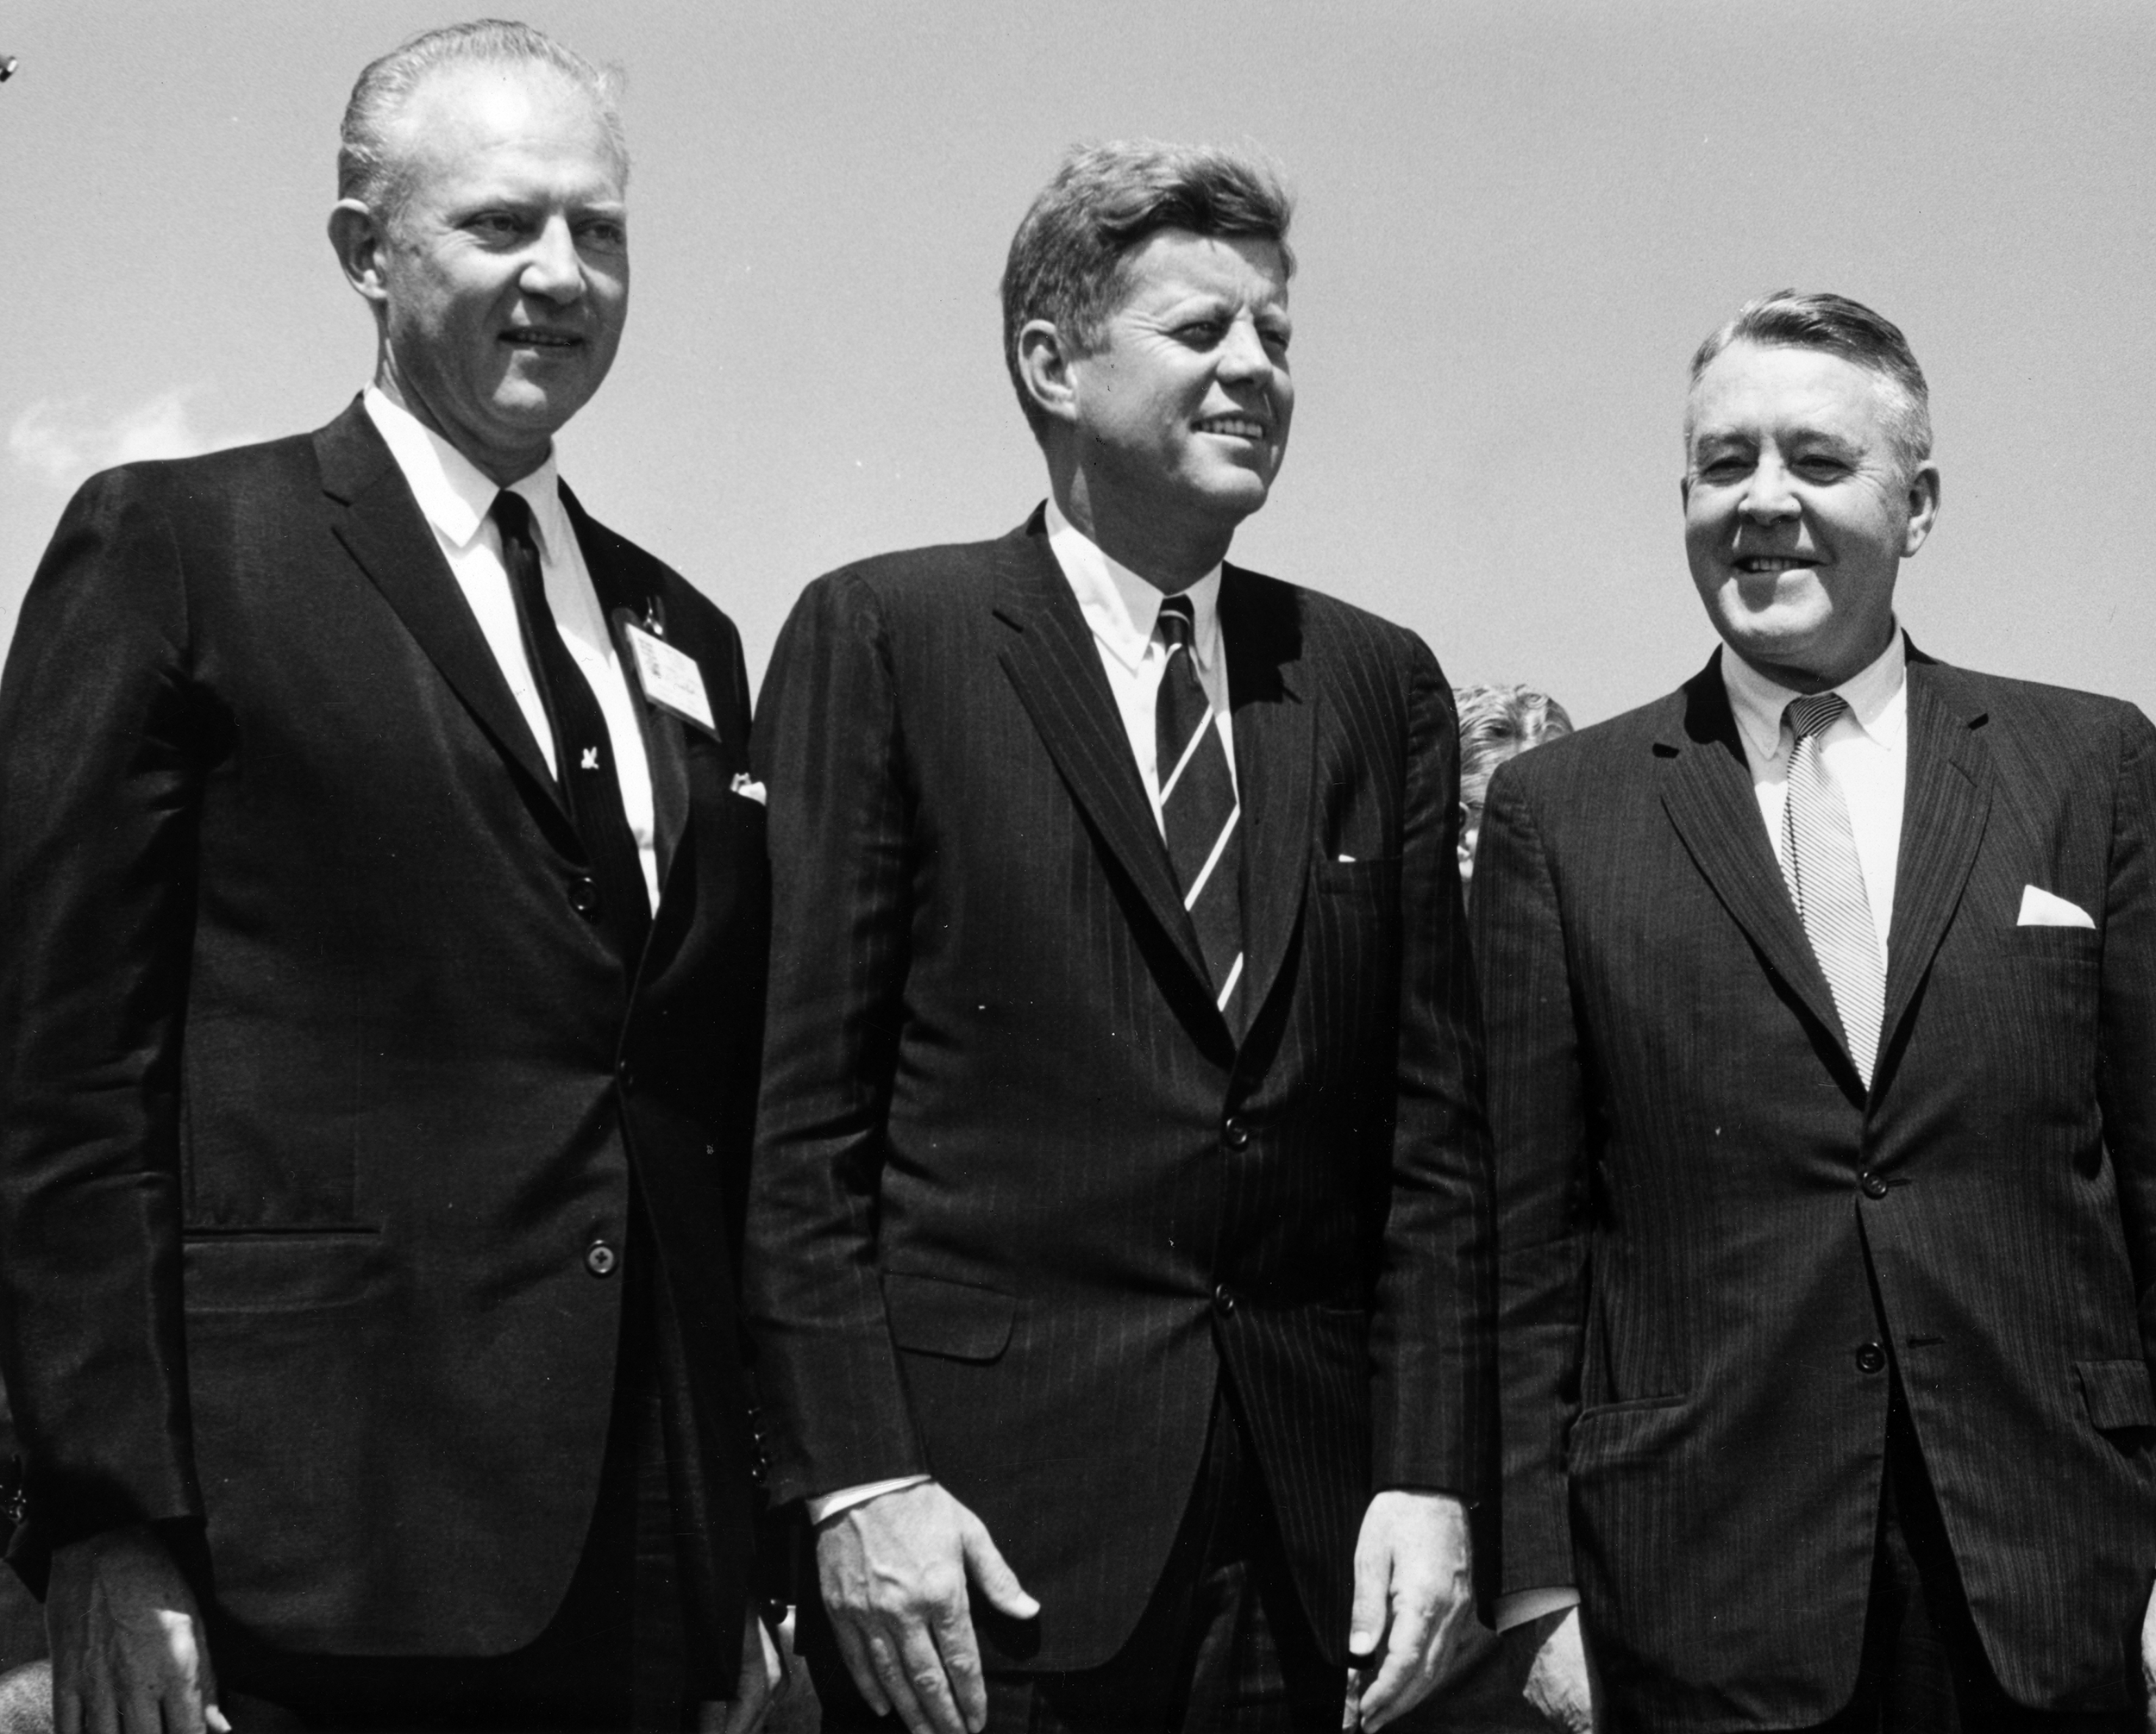 President Kennedy, Governor Stephen McNichols, and U.S. Senator John Carroll all stand together in suits.